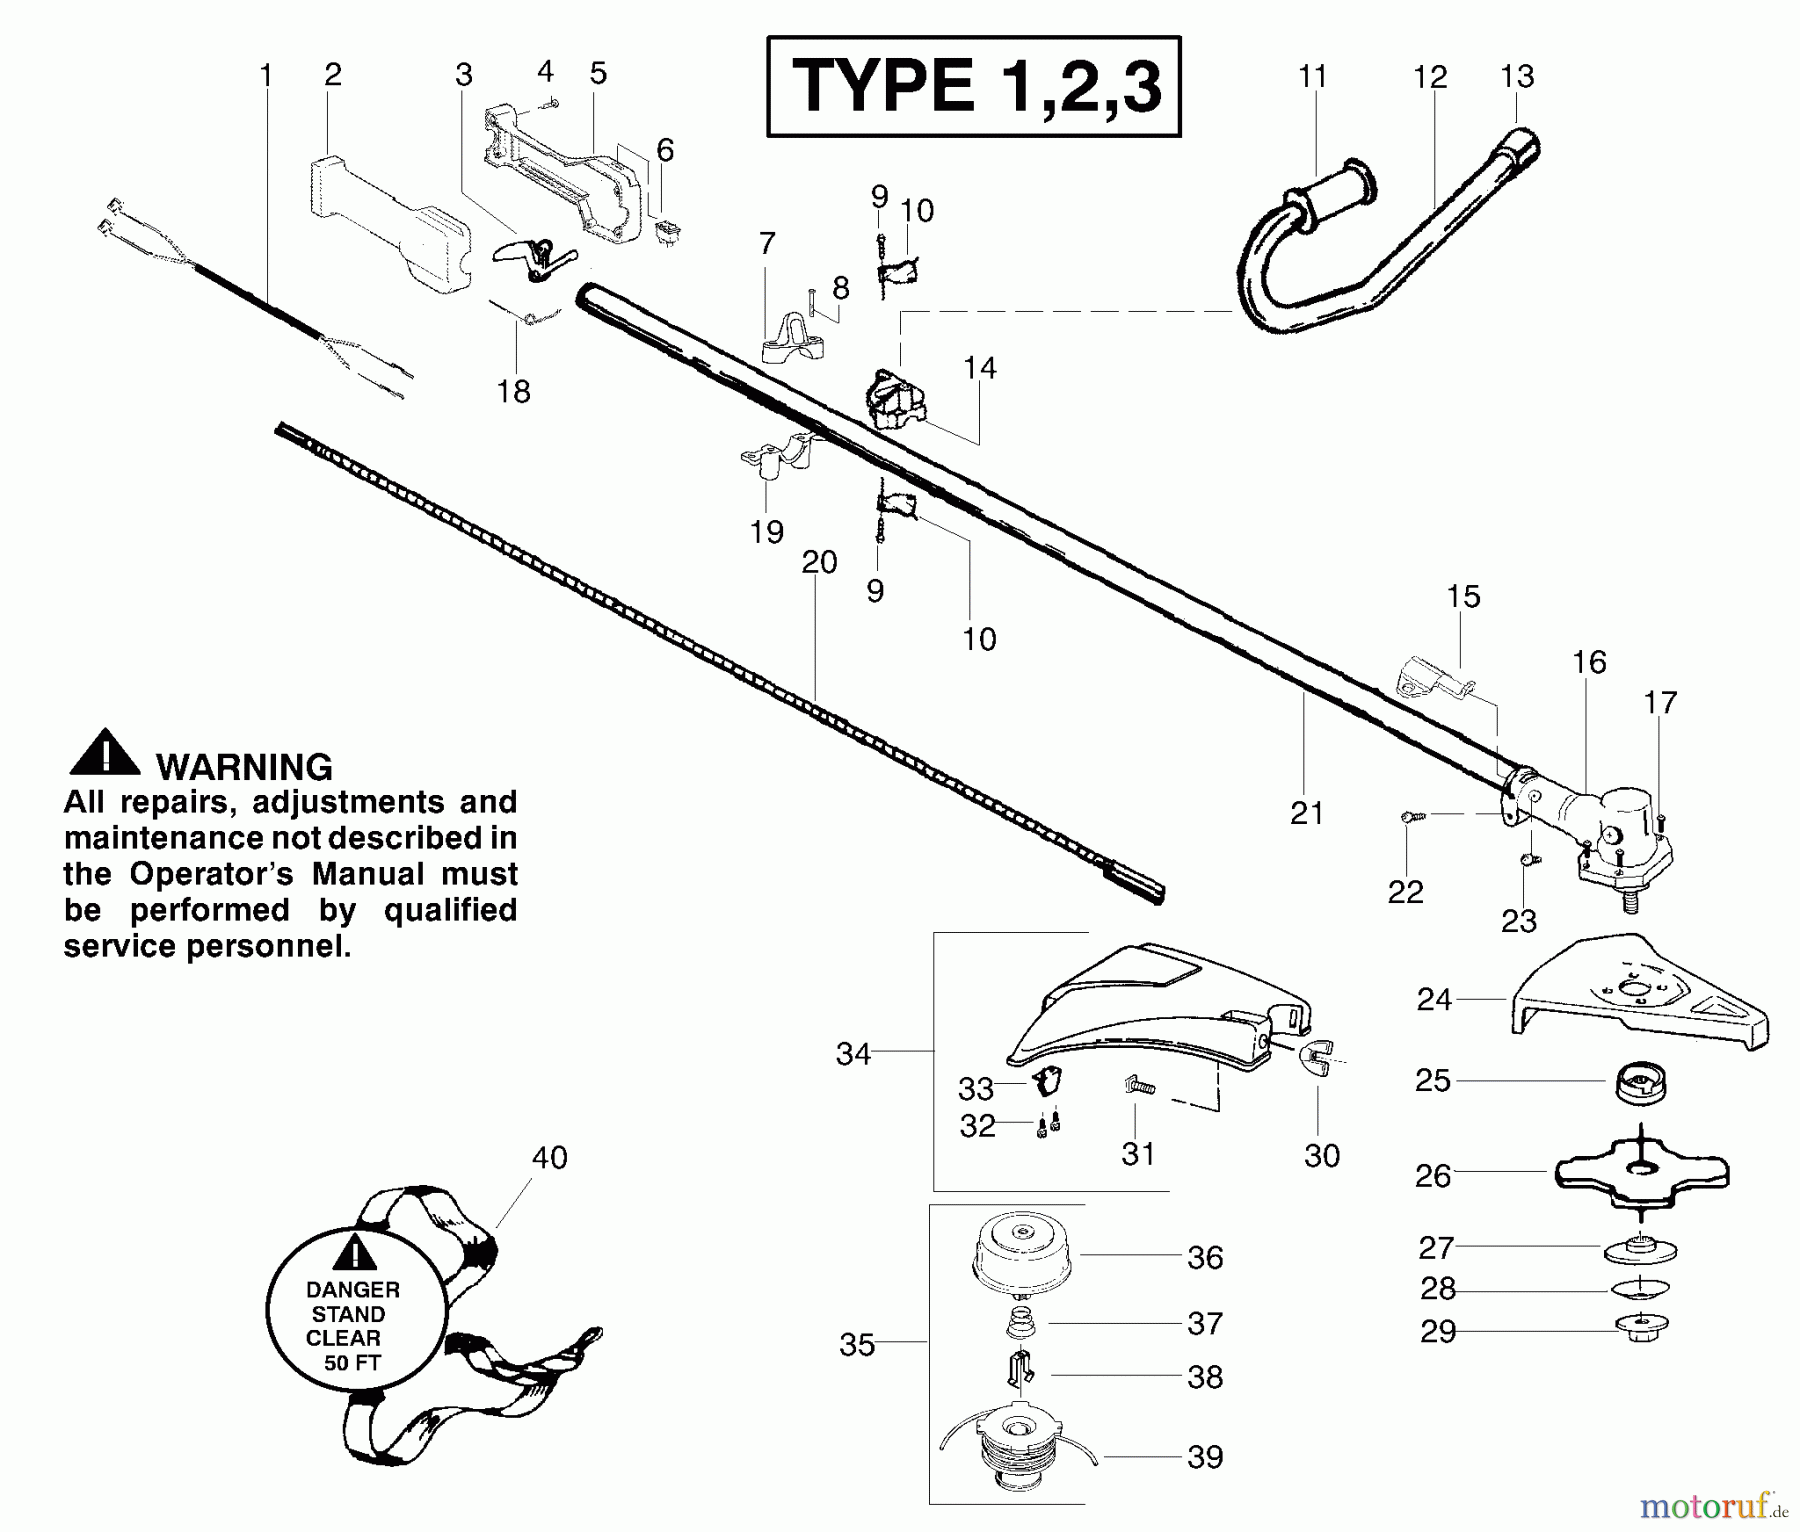  Poulan / Weed Eater Motorsensen, Trimmer BC2500LE (Type 2) - Weed Eater String Trimmer Handle & Driveshaft Assembly Type 1-3